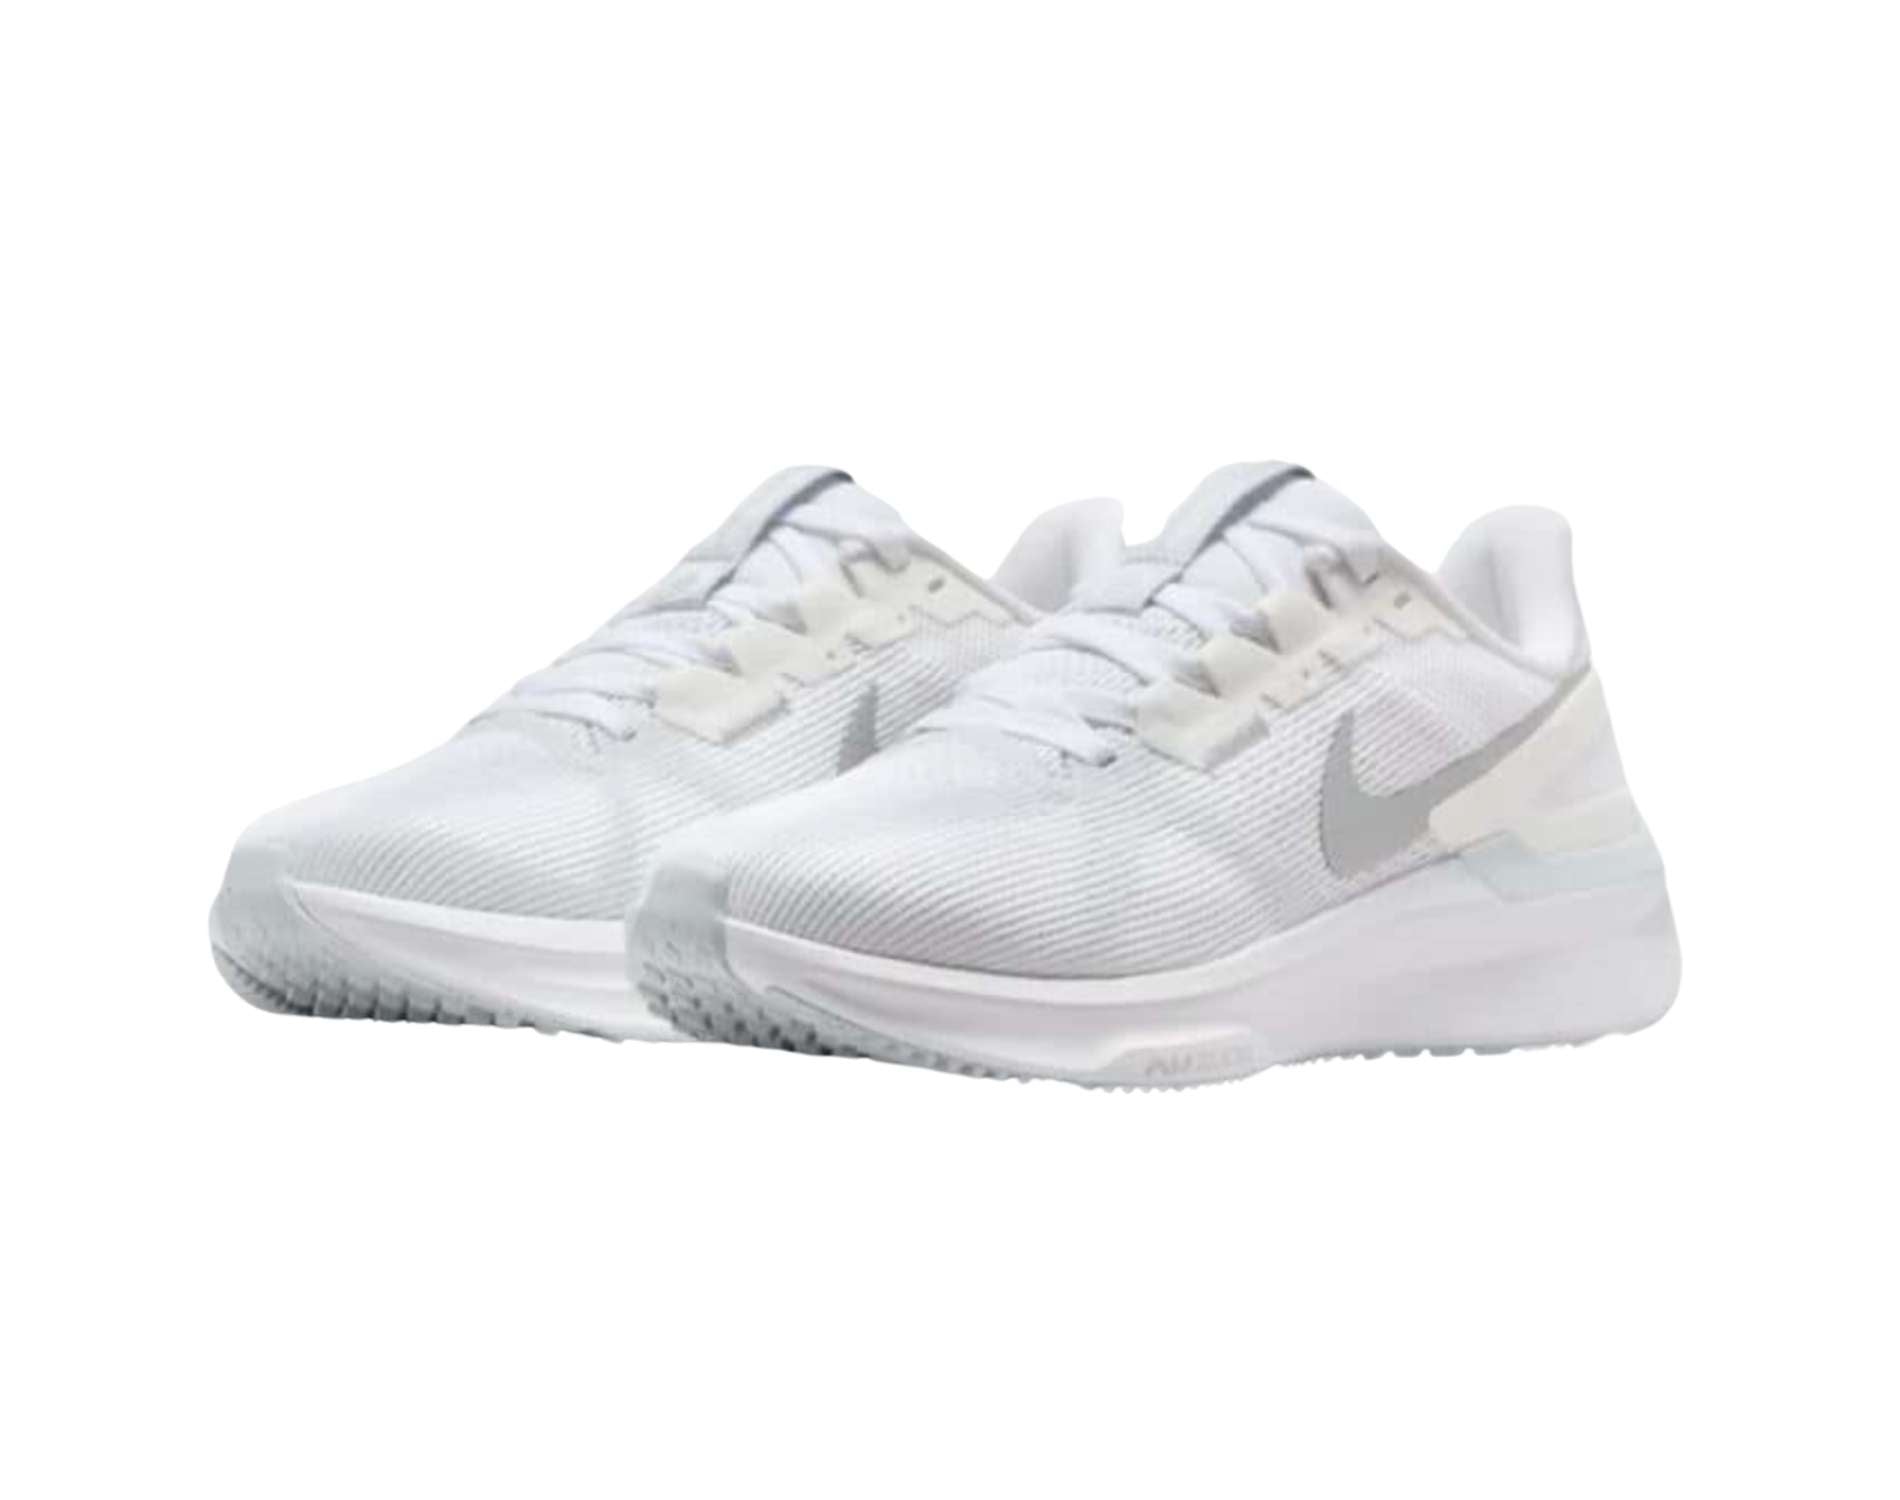 Nikes Zoom Structure 25 womens road running shoes in white pure silver platinum colour. 